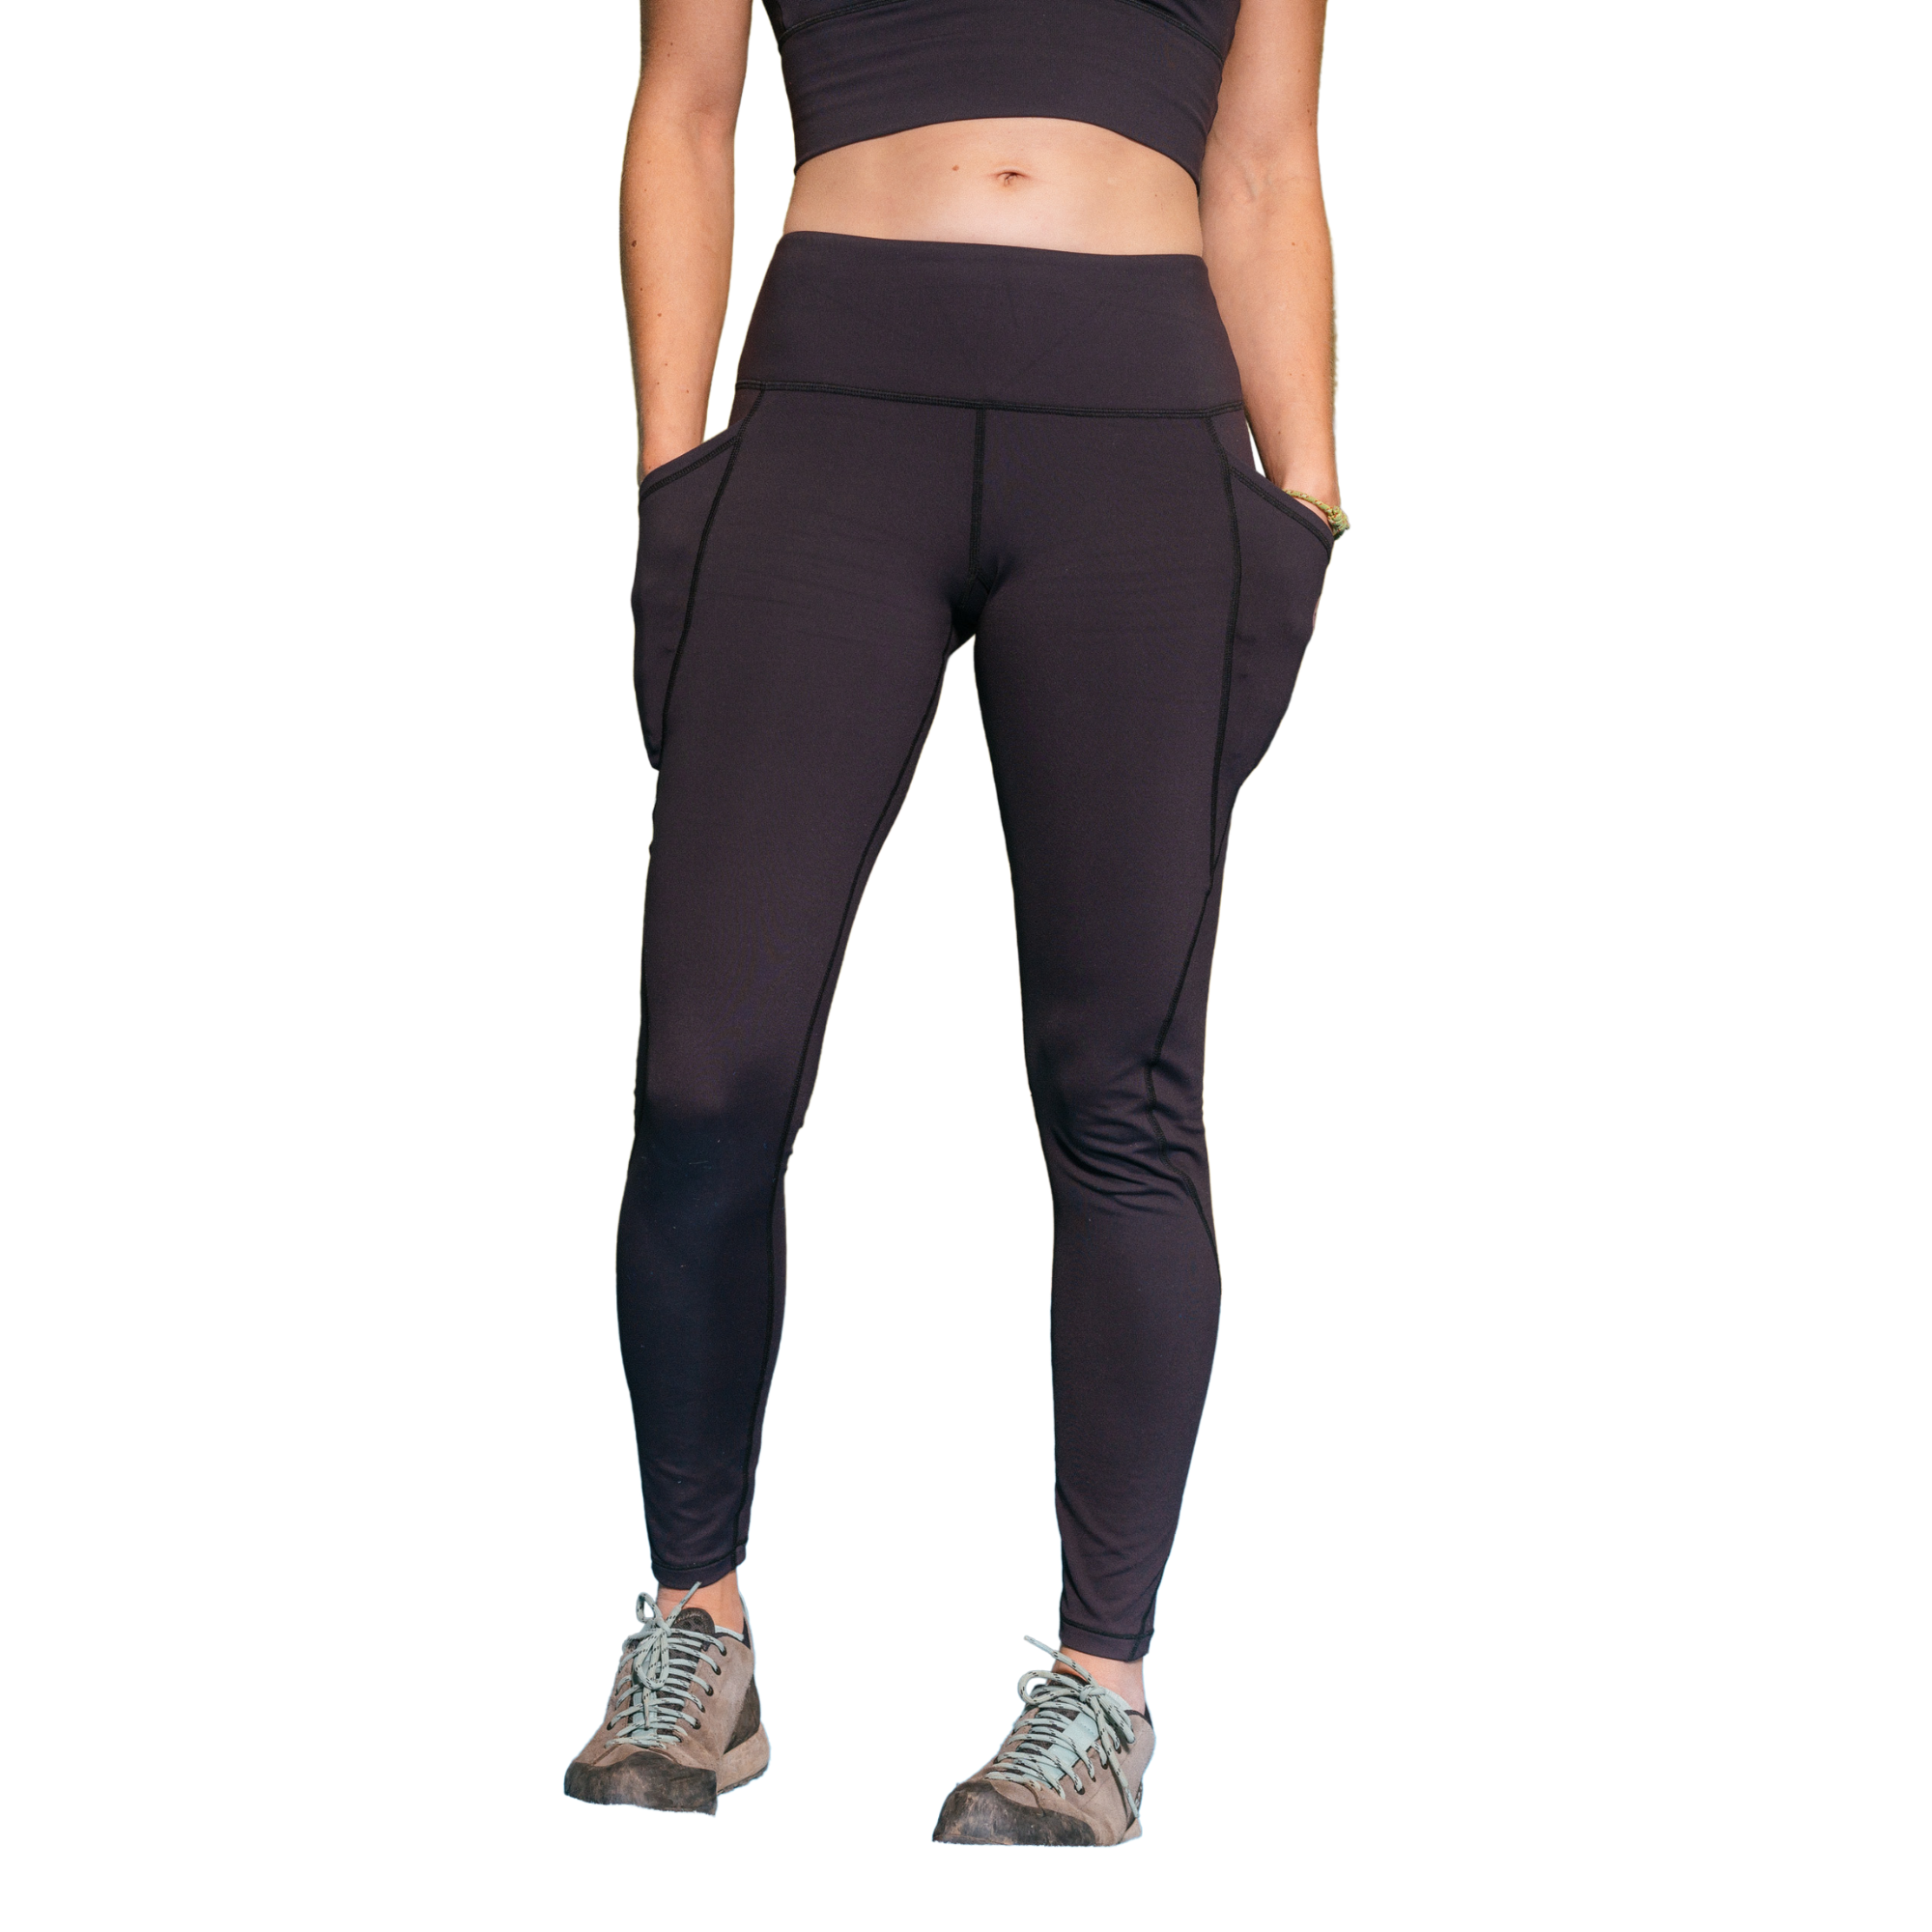 Black Diamond Session Tights, Outlet